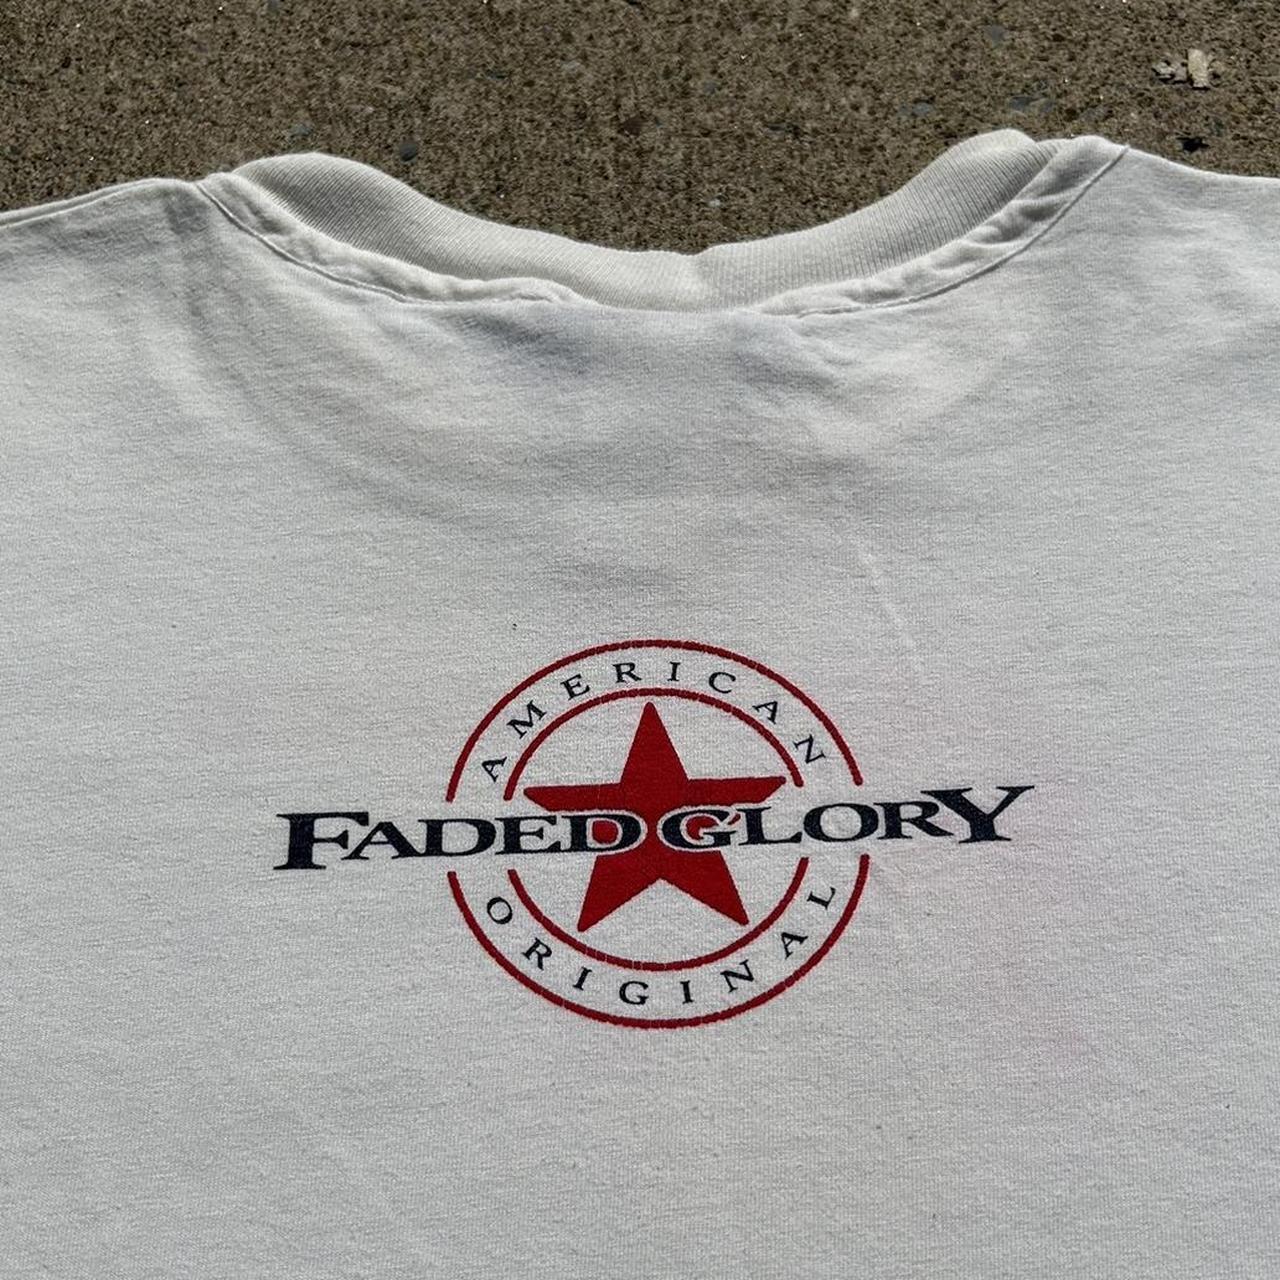 Vintage Faded Glory Tee, Made In USA, Single Stitch